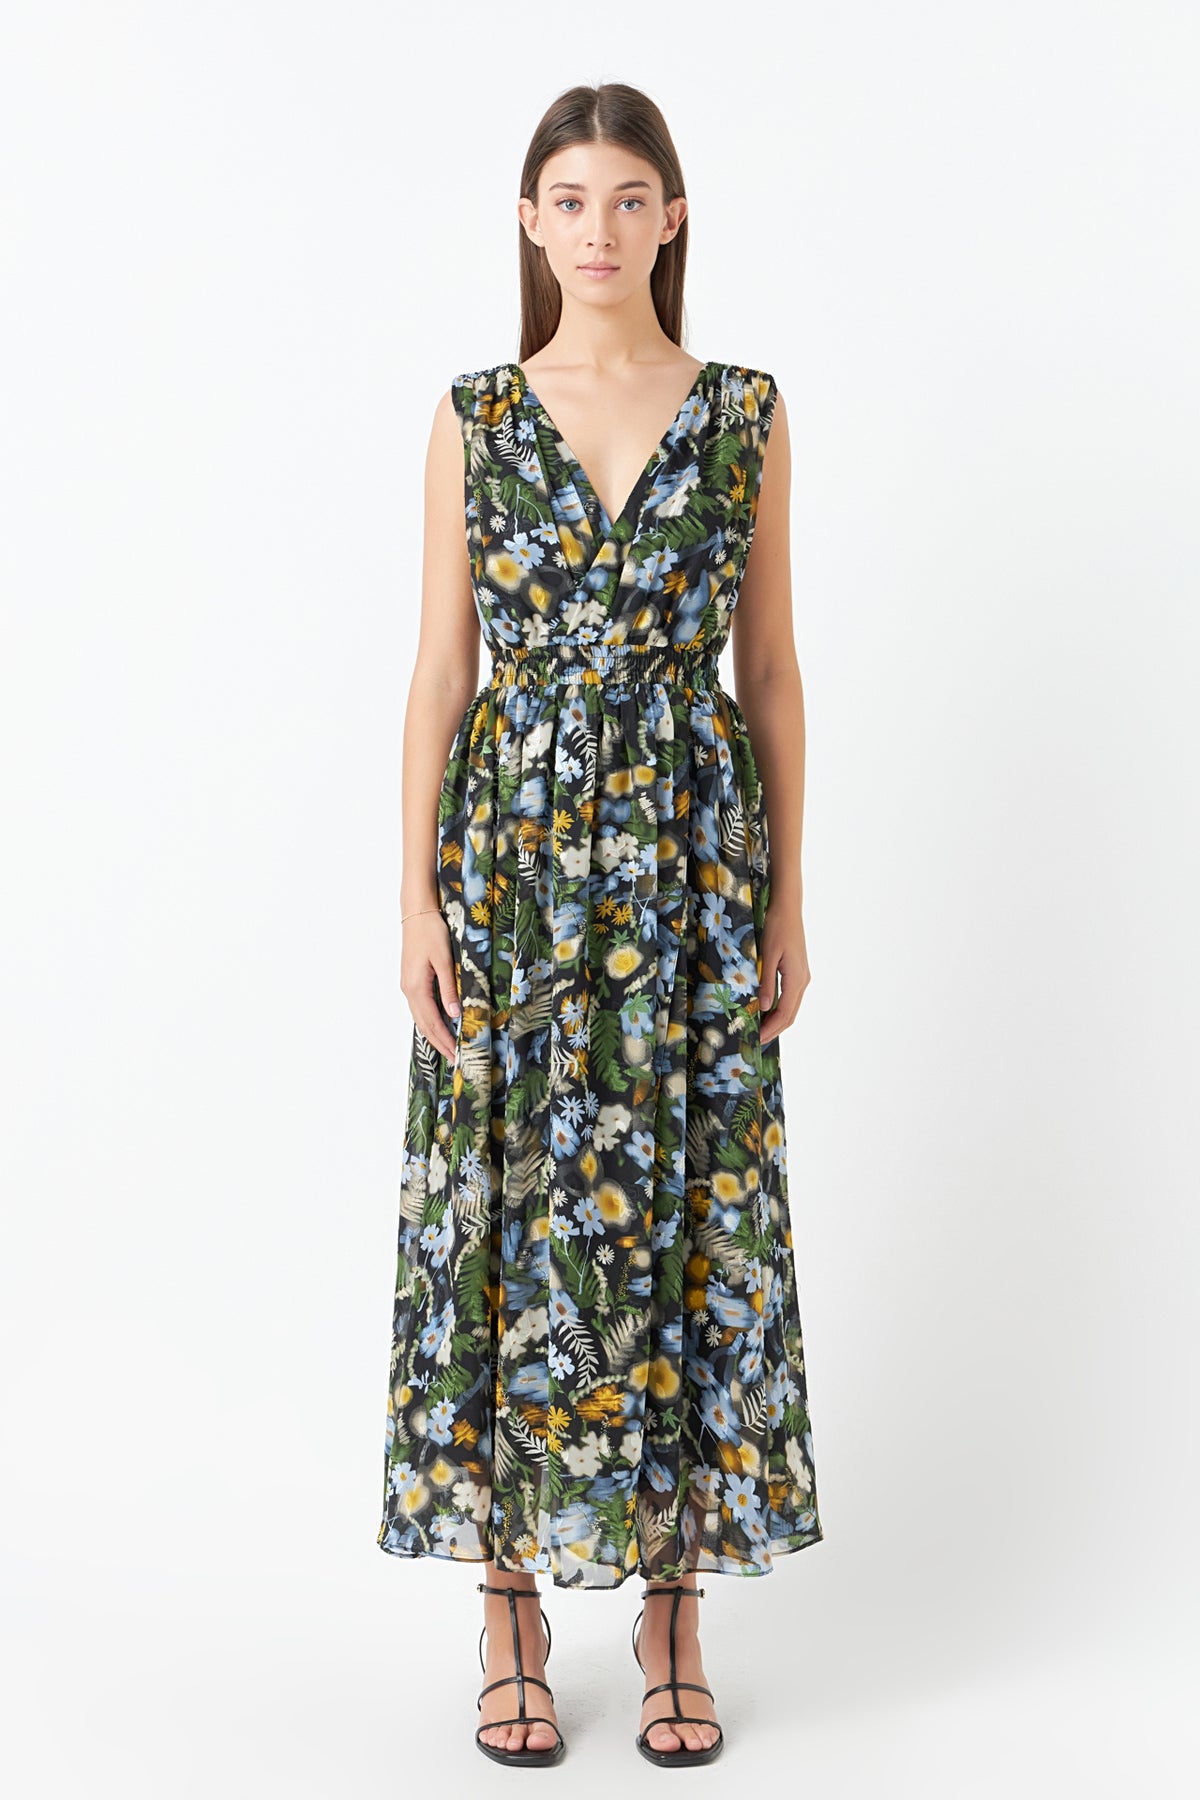 ENDLESS ROSE - Low Neck Floral Maxi Dress - DRESSES available at Objectrare